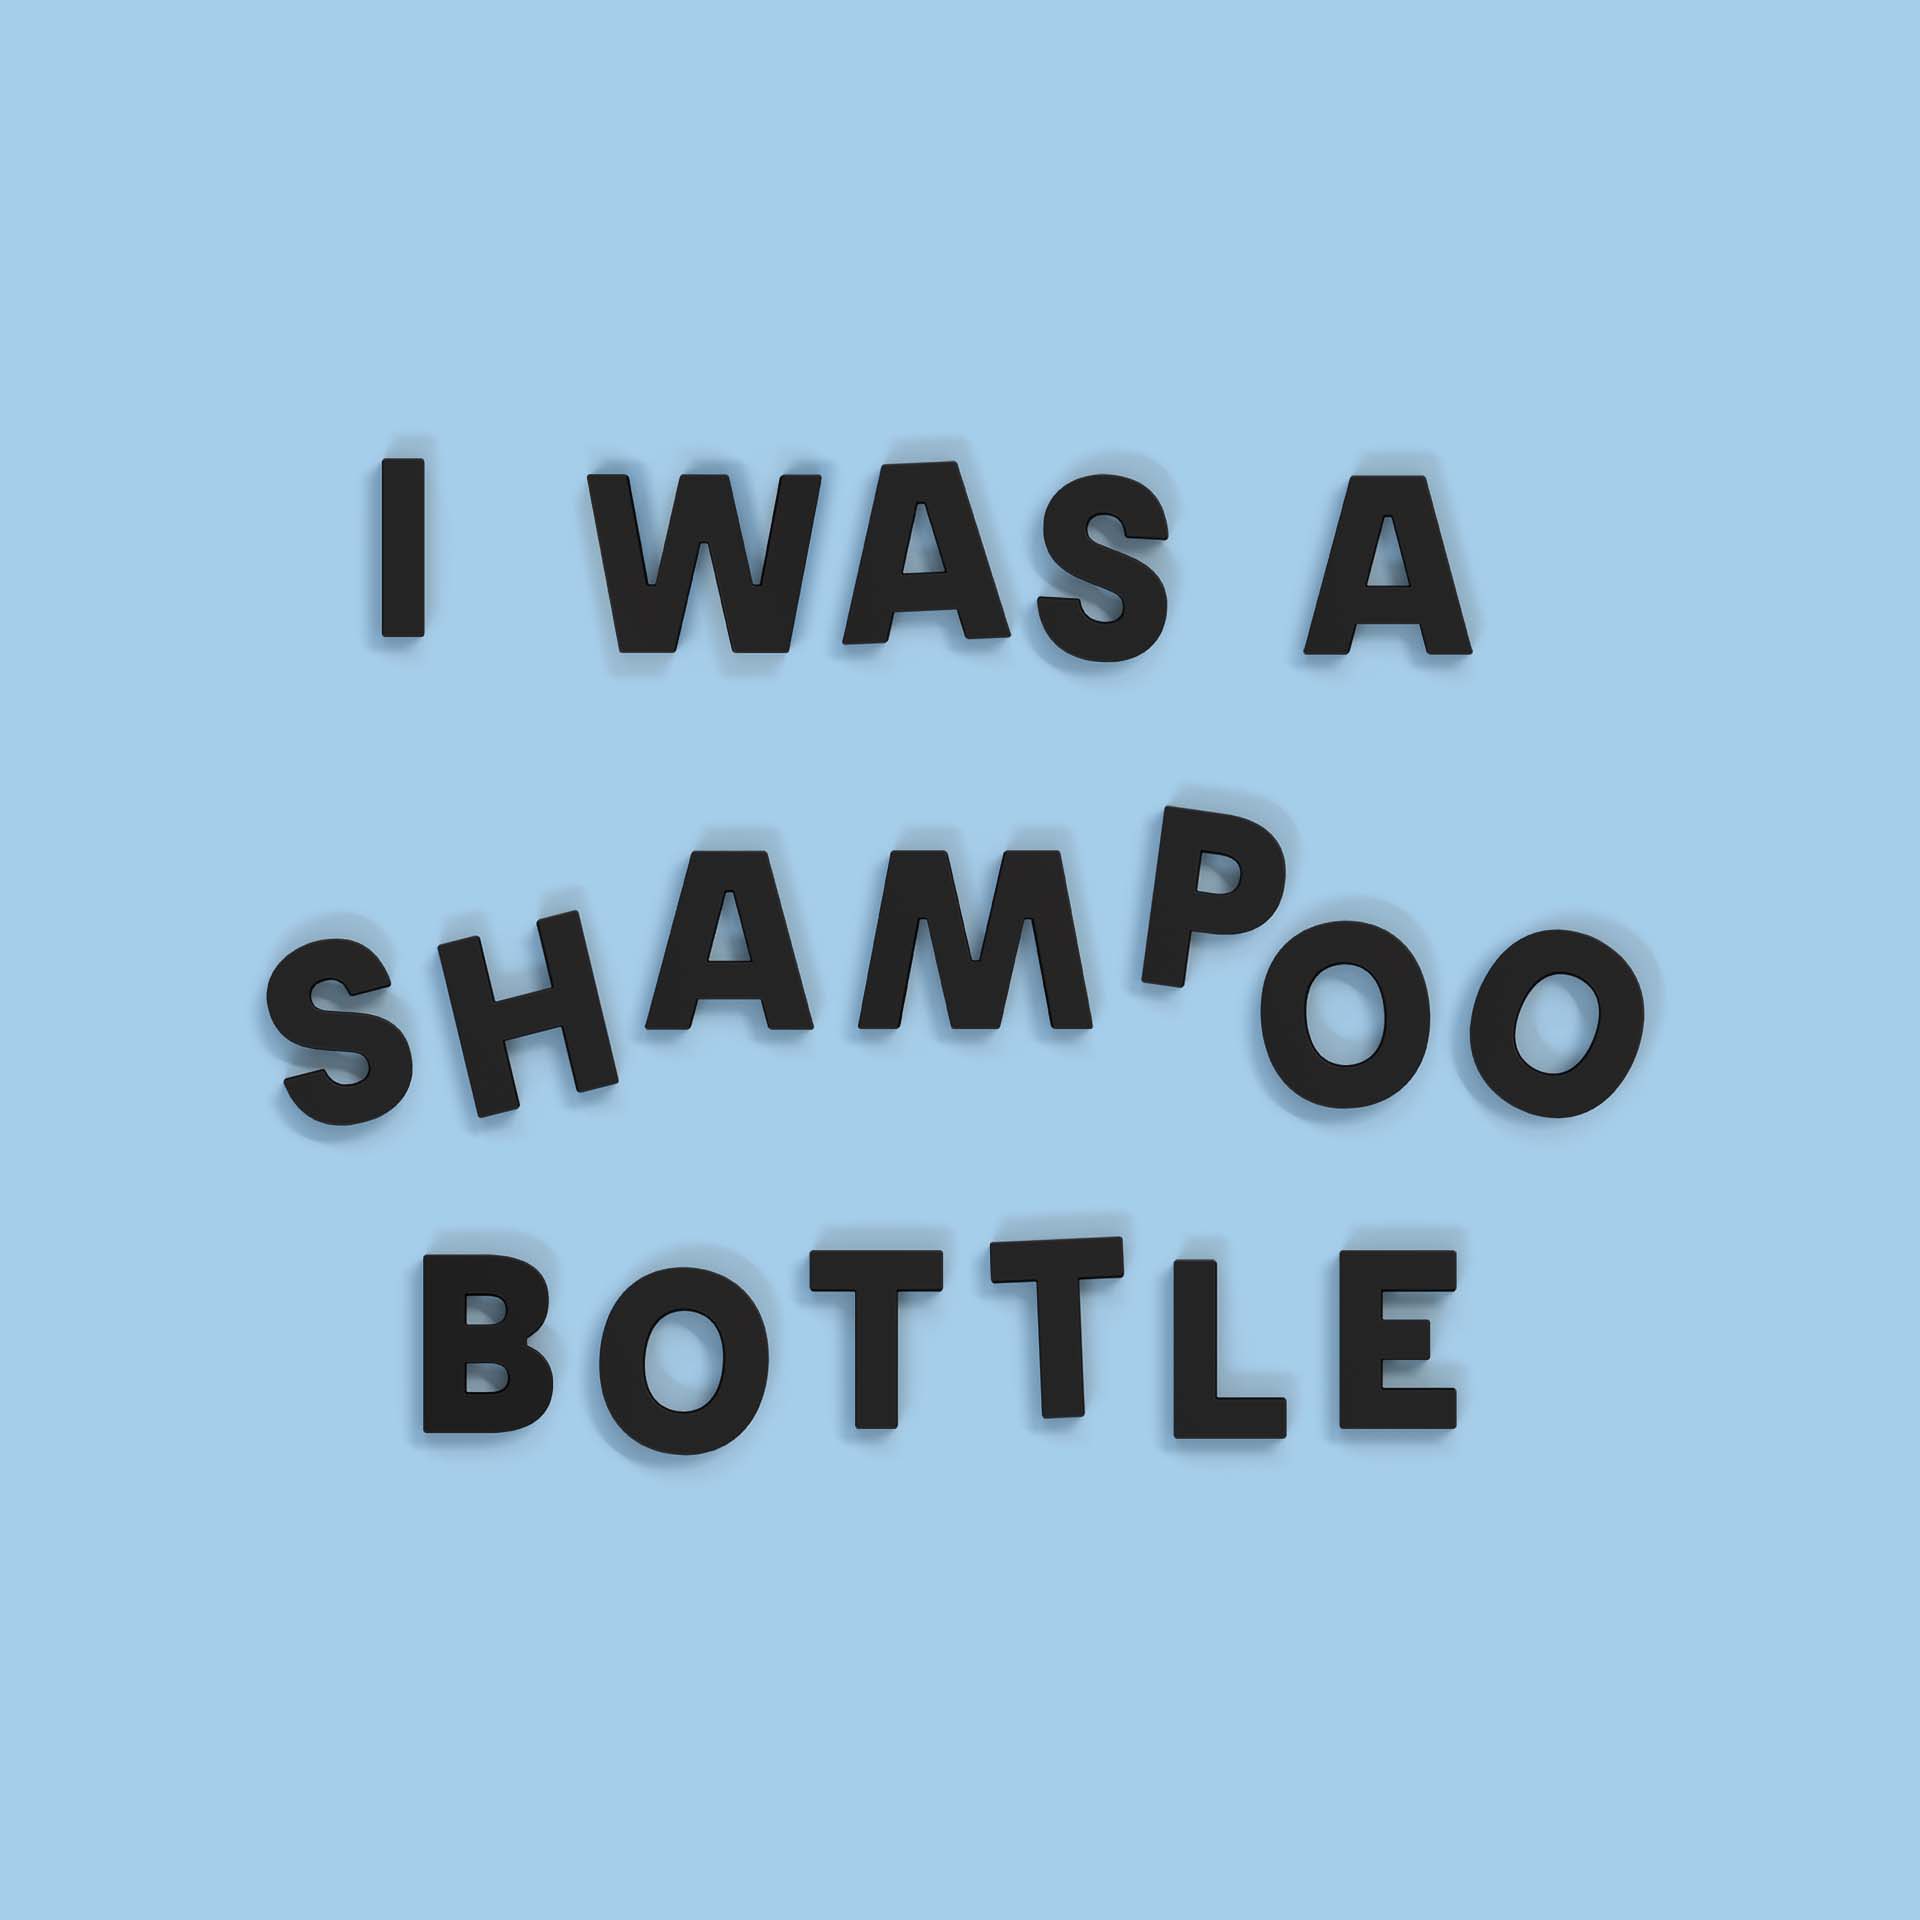 sky blue background with black wordbits strong magnetic alphabet magnets spelling "i was a shampoo bottle" to illustrate that they are made from post-consumer recycled plastic